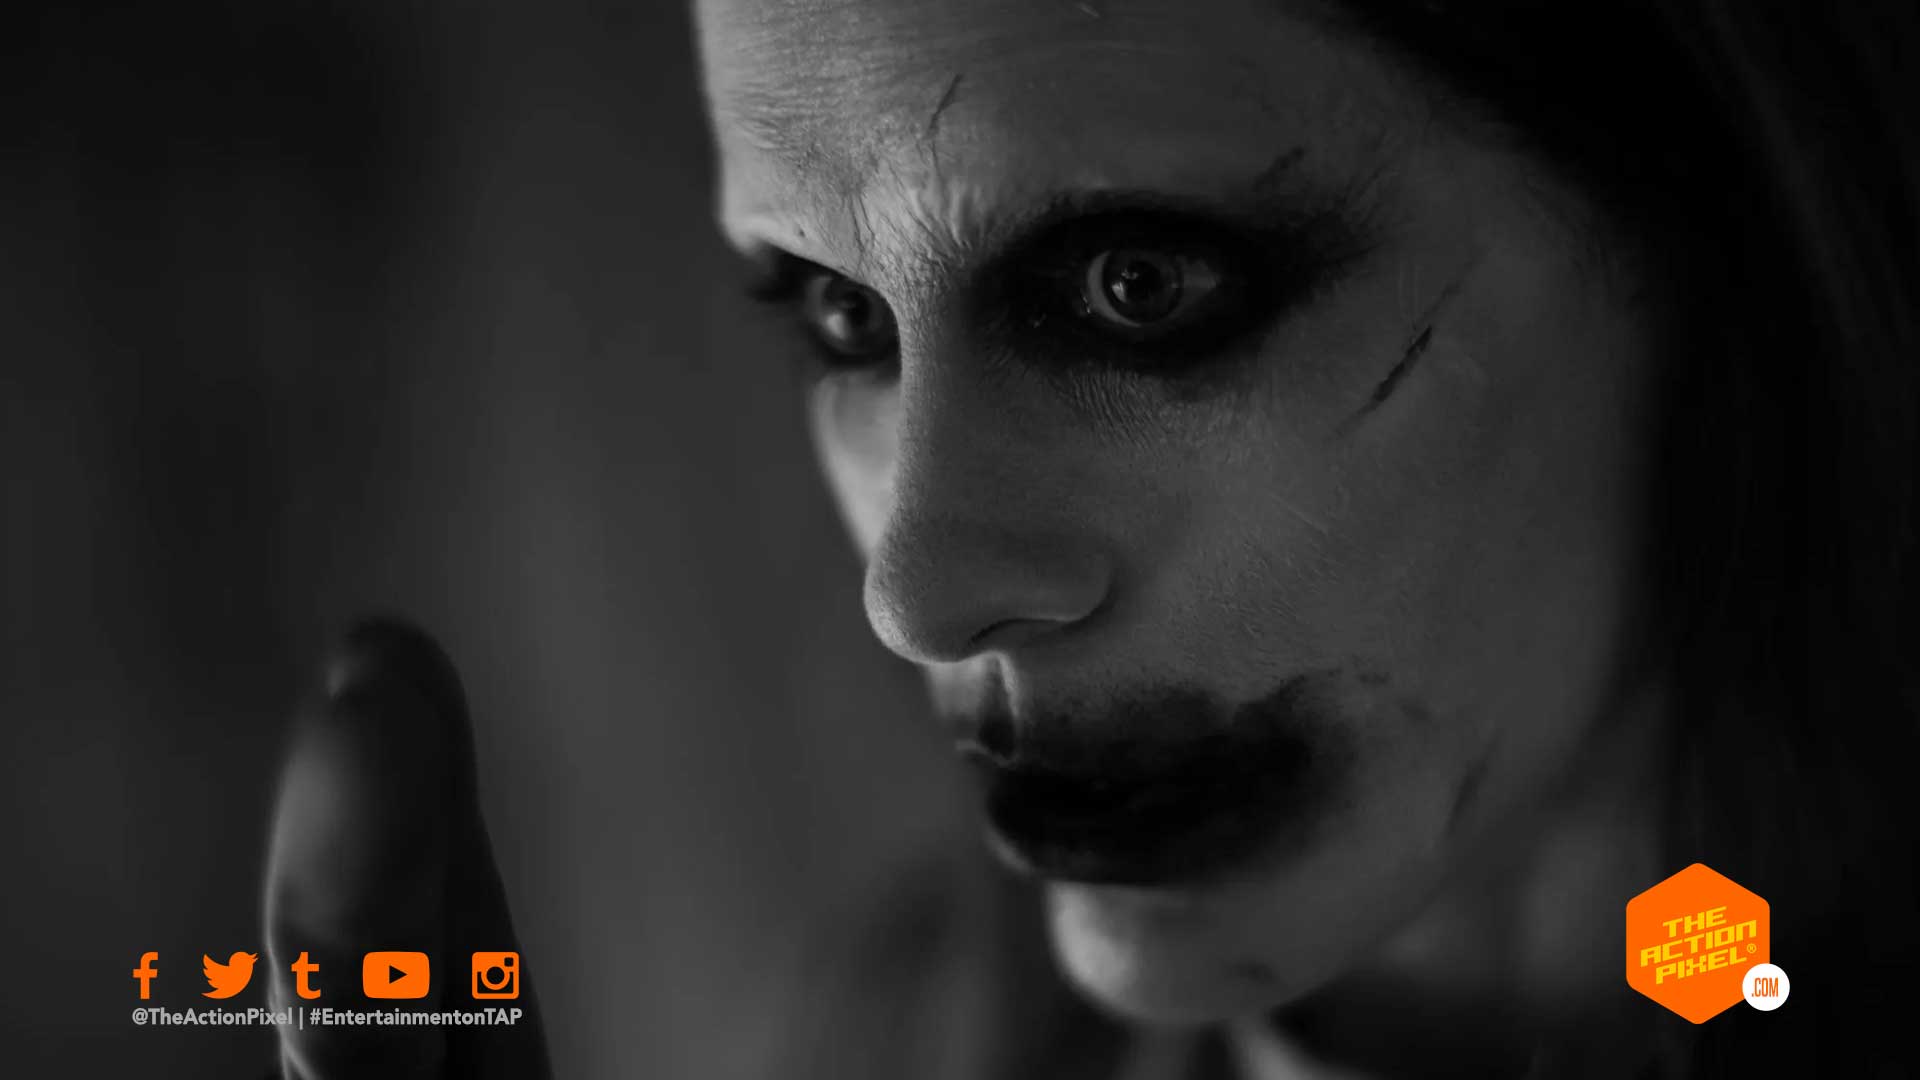 joker, jared leto, the joker, dc comics, hbo max, zack snyder, dceu movie, snyder cut, jared leto joker, first look, hbo max justice league, justice league snyder cut, justice league movie, entertainment on tap, featured,